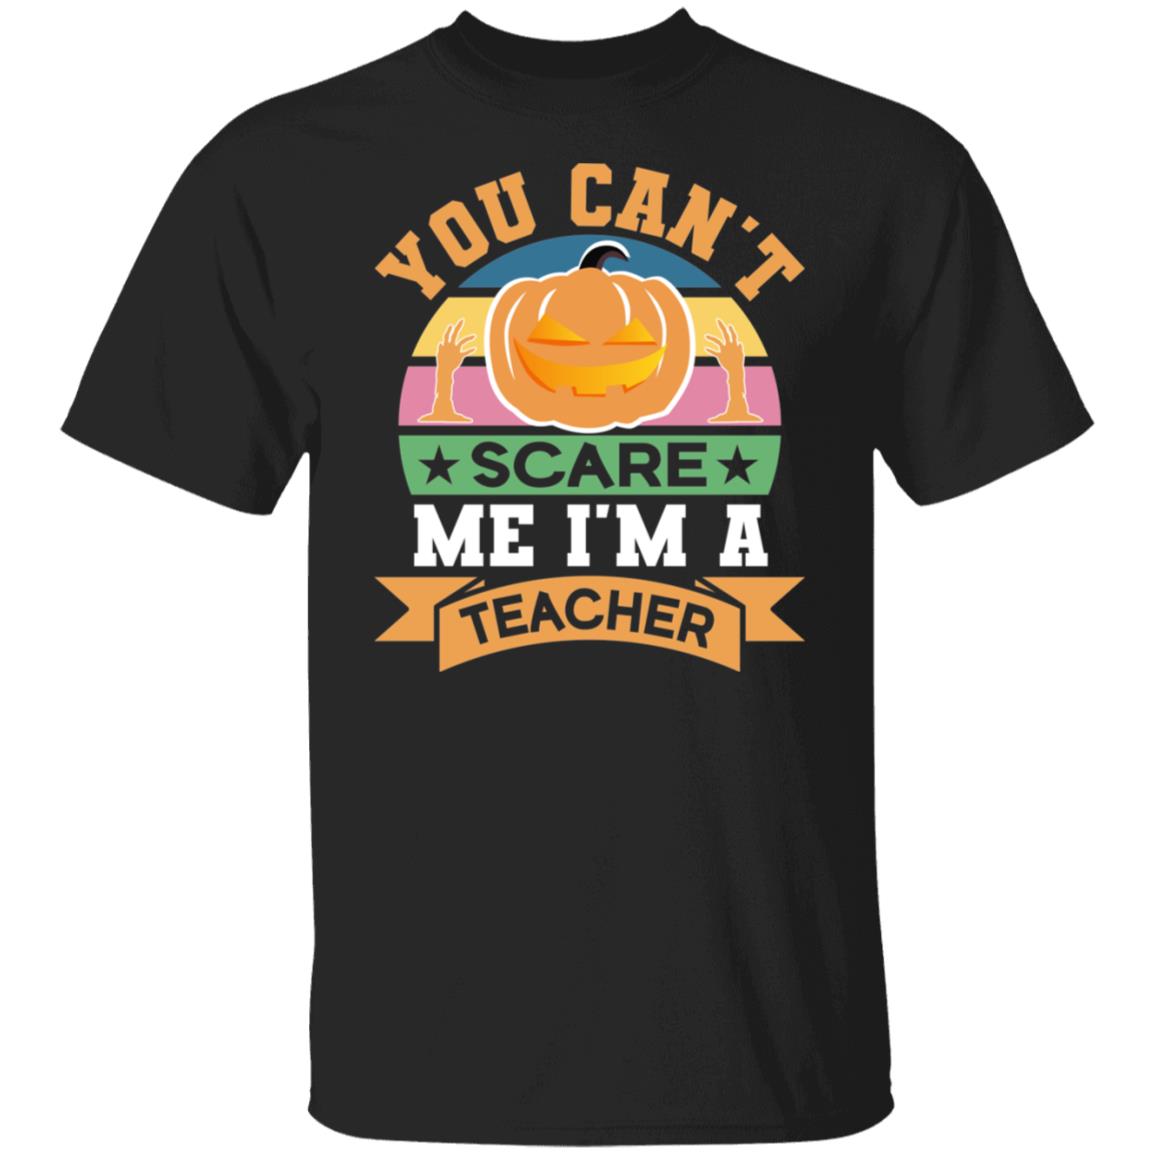 You Can't Scare Me I'm a Teacher Funny Halloween Gift